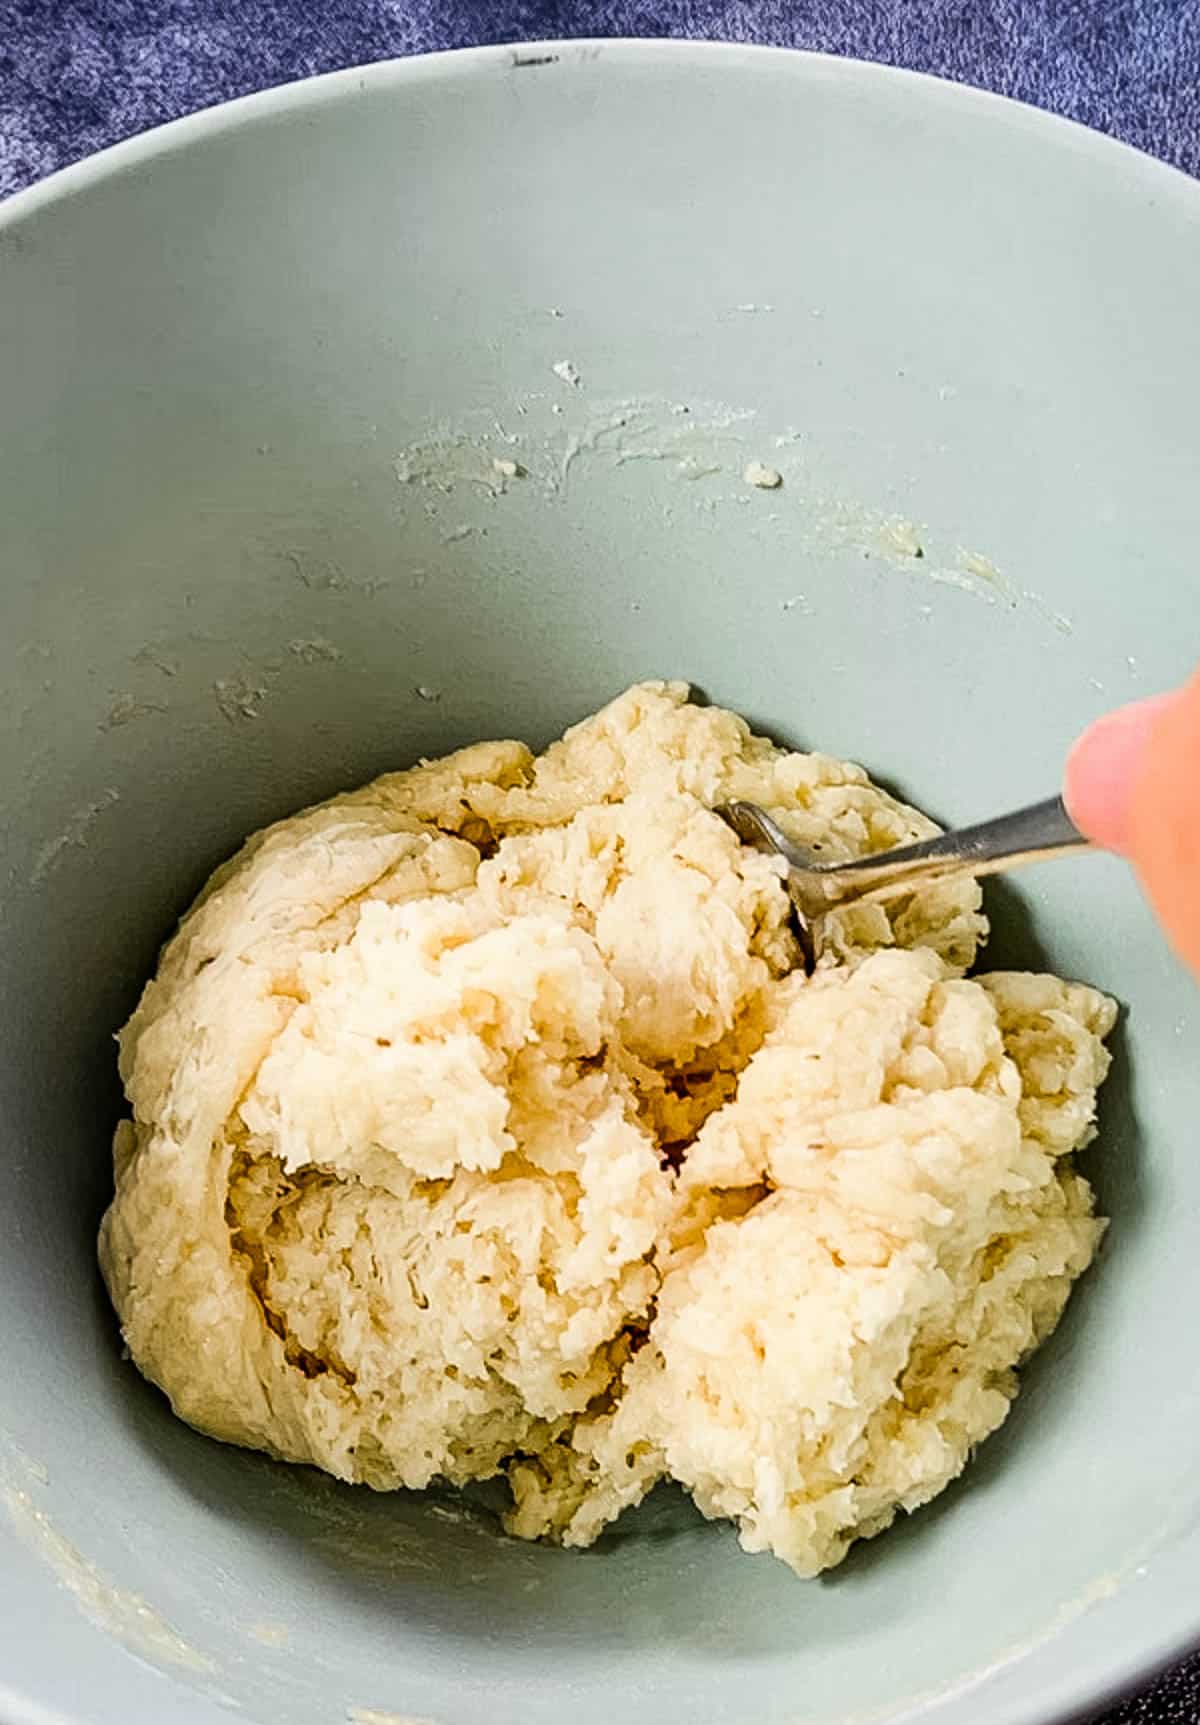 the dry and wet ingredients mixed together to form a dough.